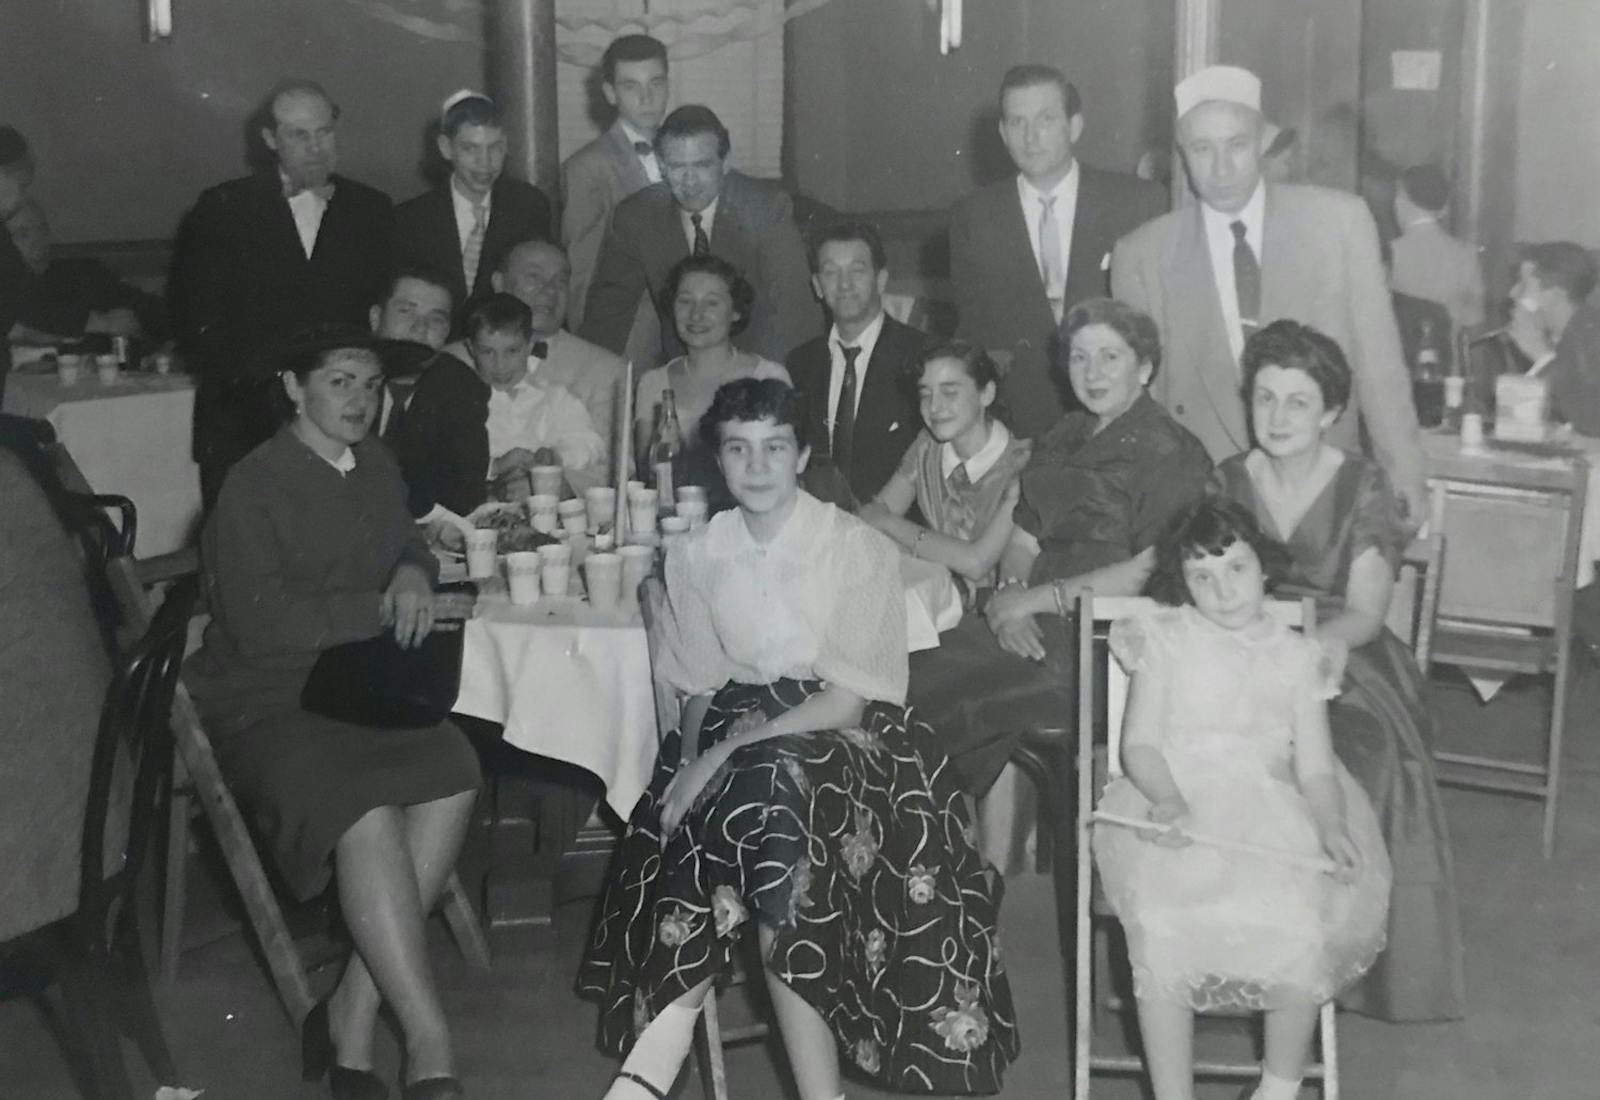 Family photo from cousin Arthur’s Bar Mitzvah, Queens, 1956. Jane is seated (front row all the way to the right) with Bertie seated directly behind her.